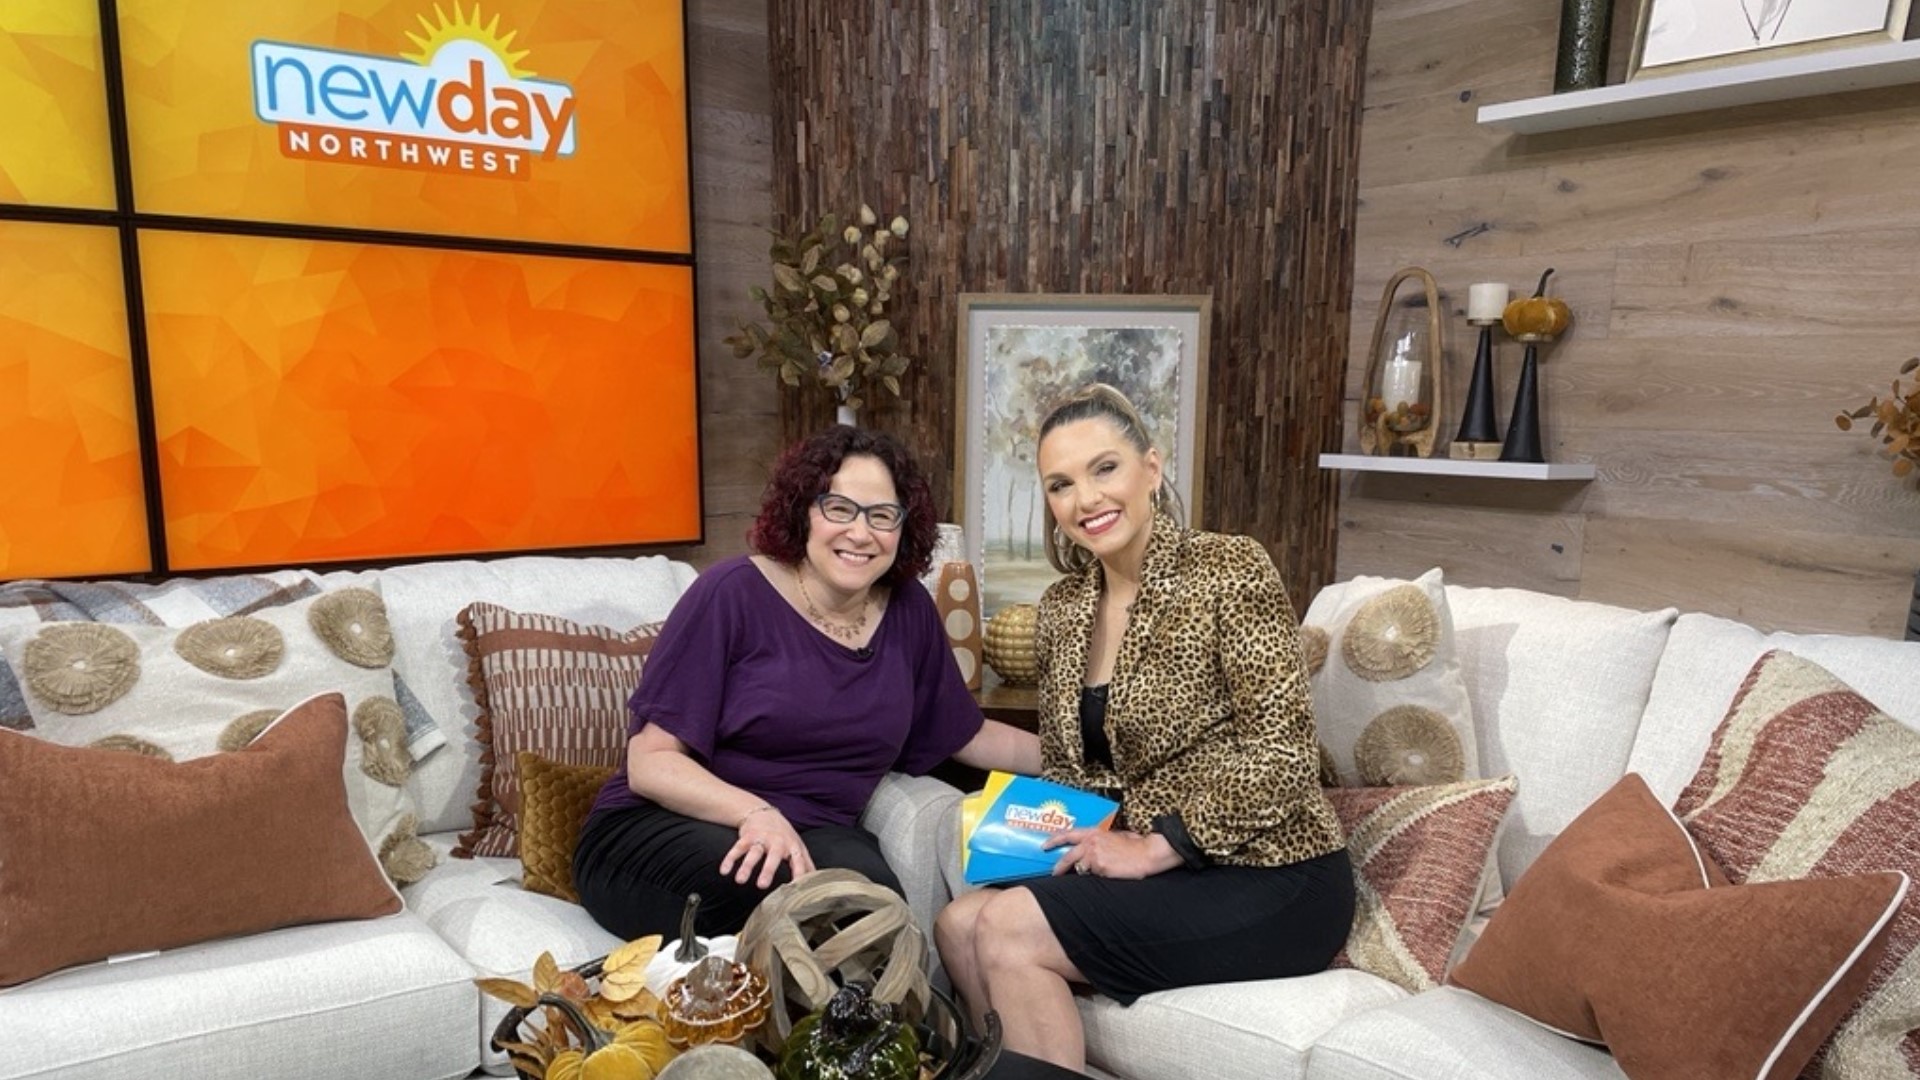 Seattle Symphony violinist Elisa Barston talks about the "Music's in our Blood" campaign and her personal connection to this worthy cause. #newdaynw